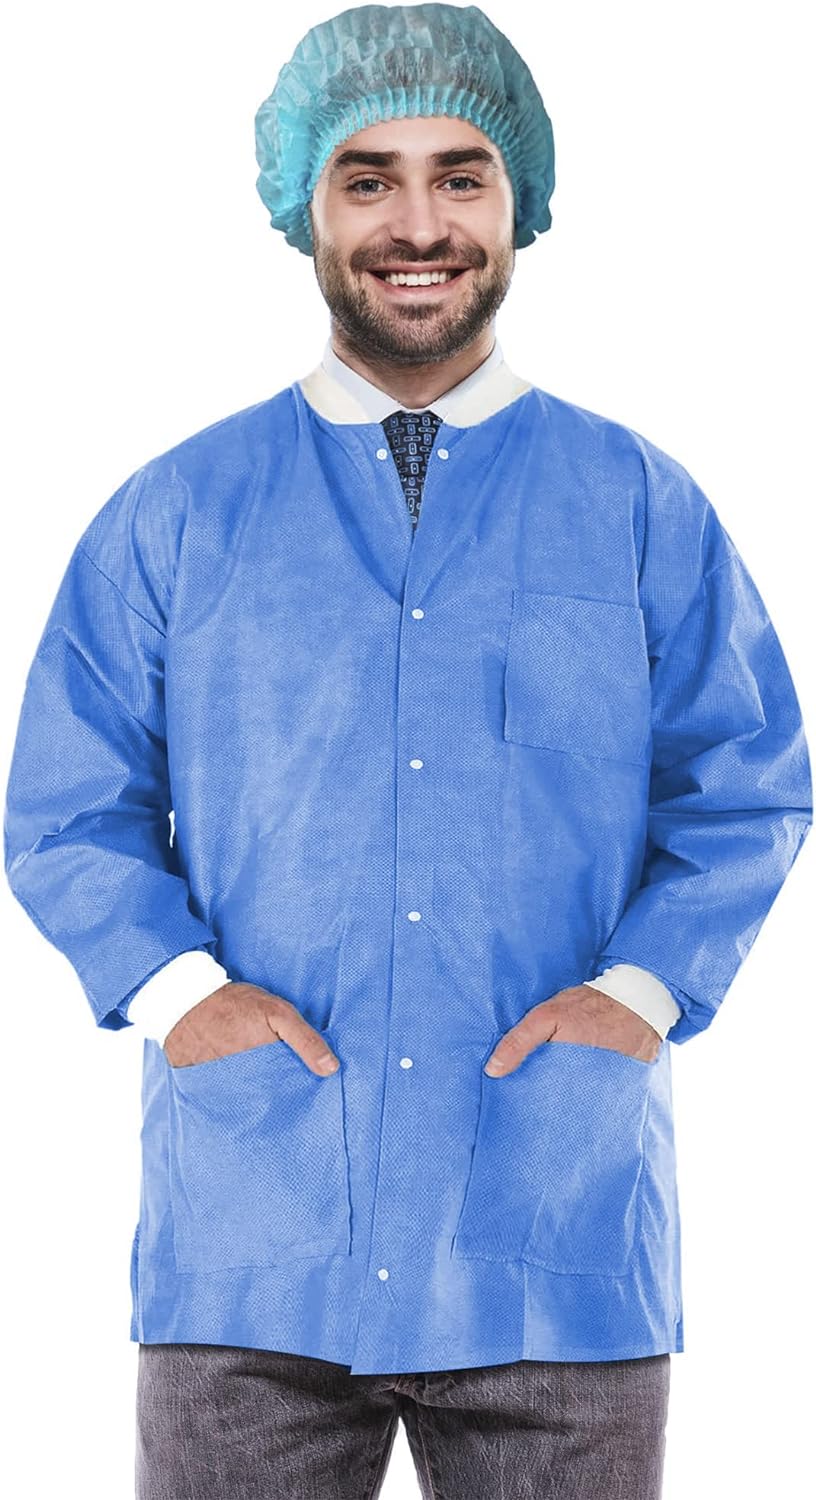 Amazing Supply EZGOODZ Disposable Lab Jackets, 30". Pack of 10 Medical Blue Hip-Length Work Gowns Large. SMS 50 gsm Shirts with Snaps Fro